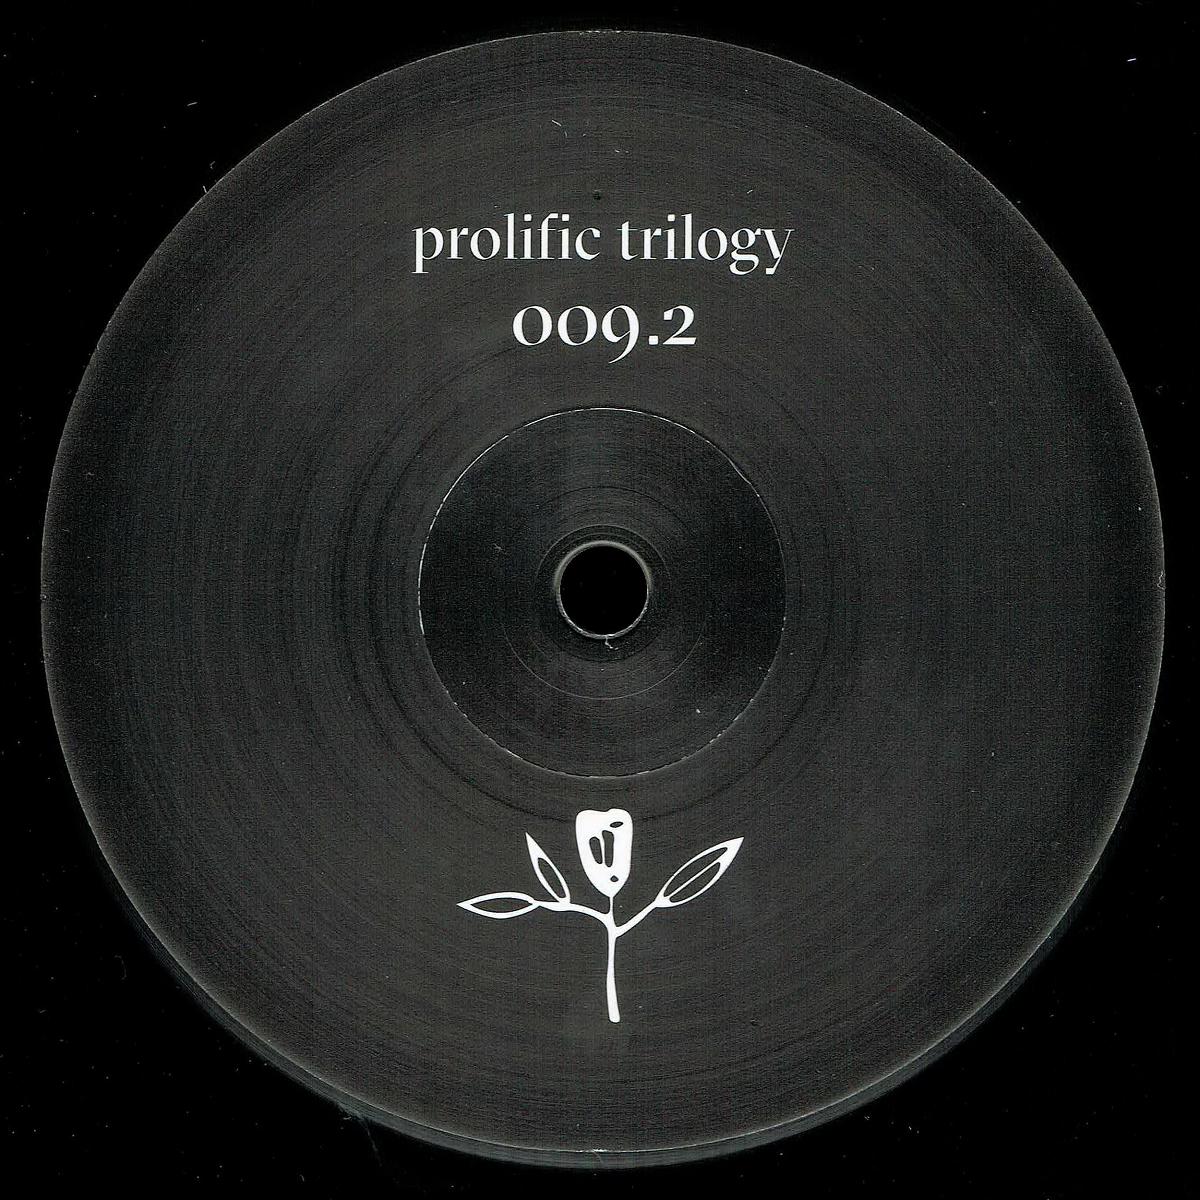 image cover: S.A.M. - Profilic Triology 009.2 / DELAPHINE009.2